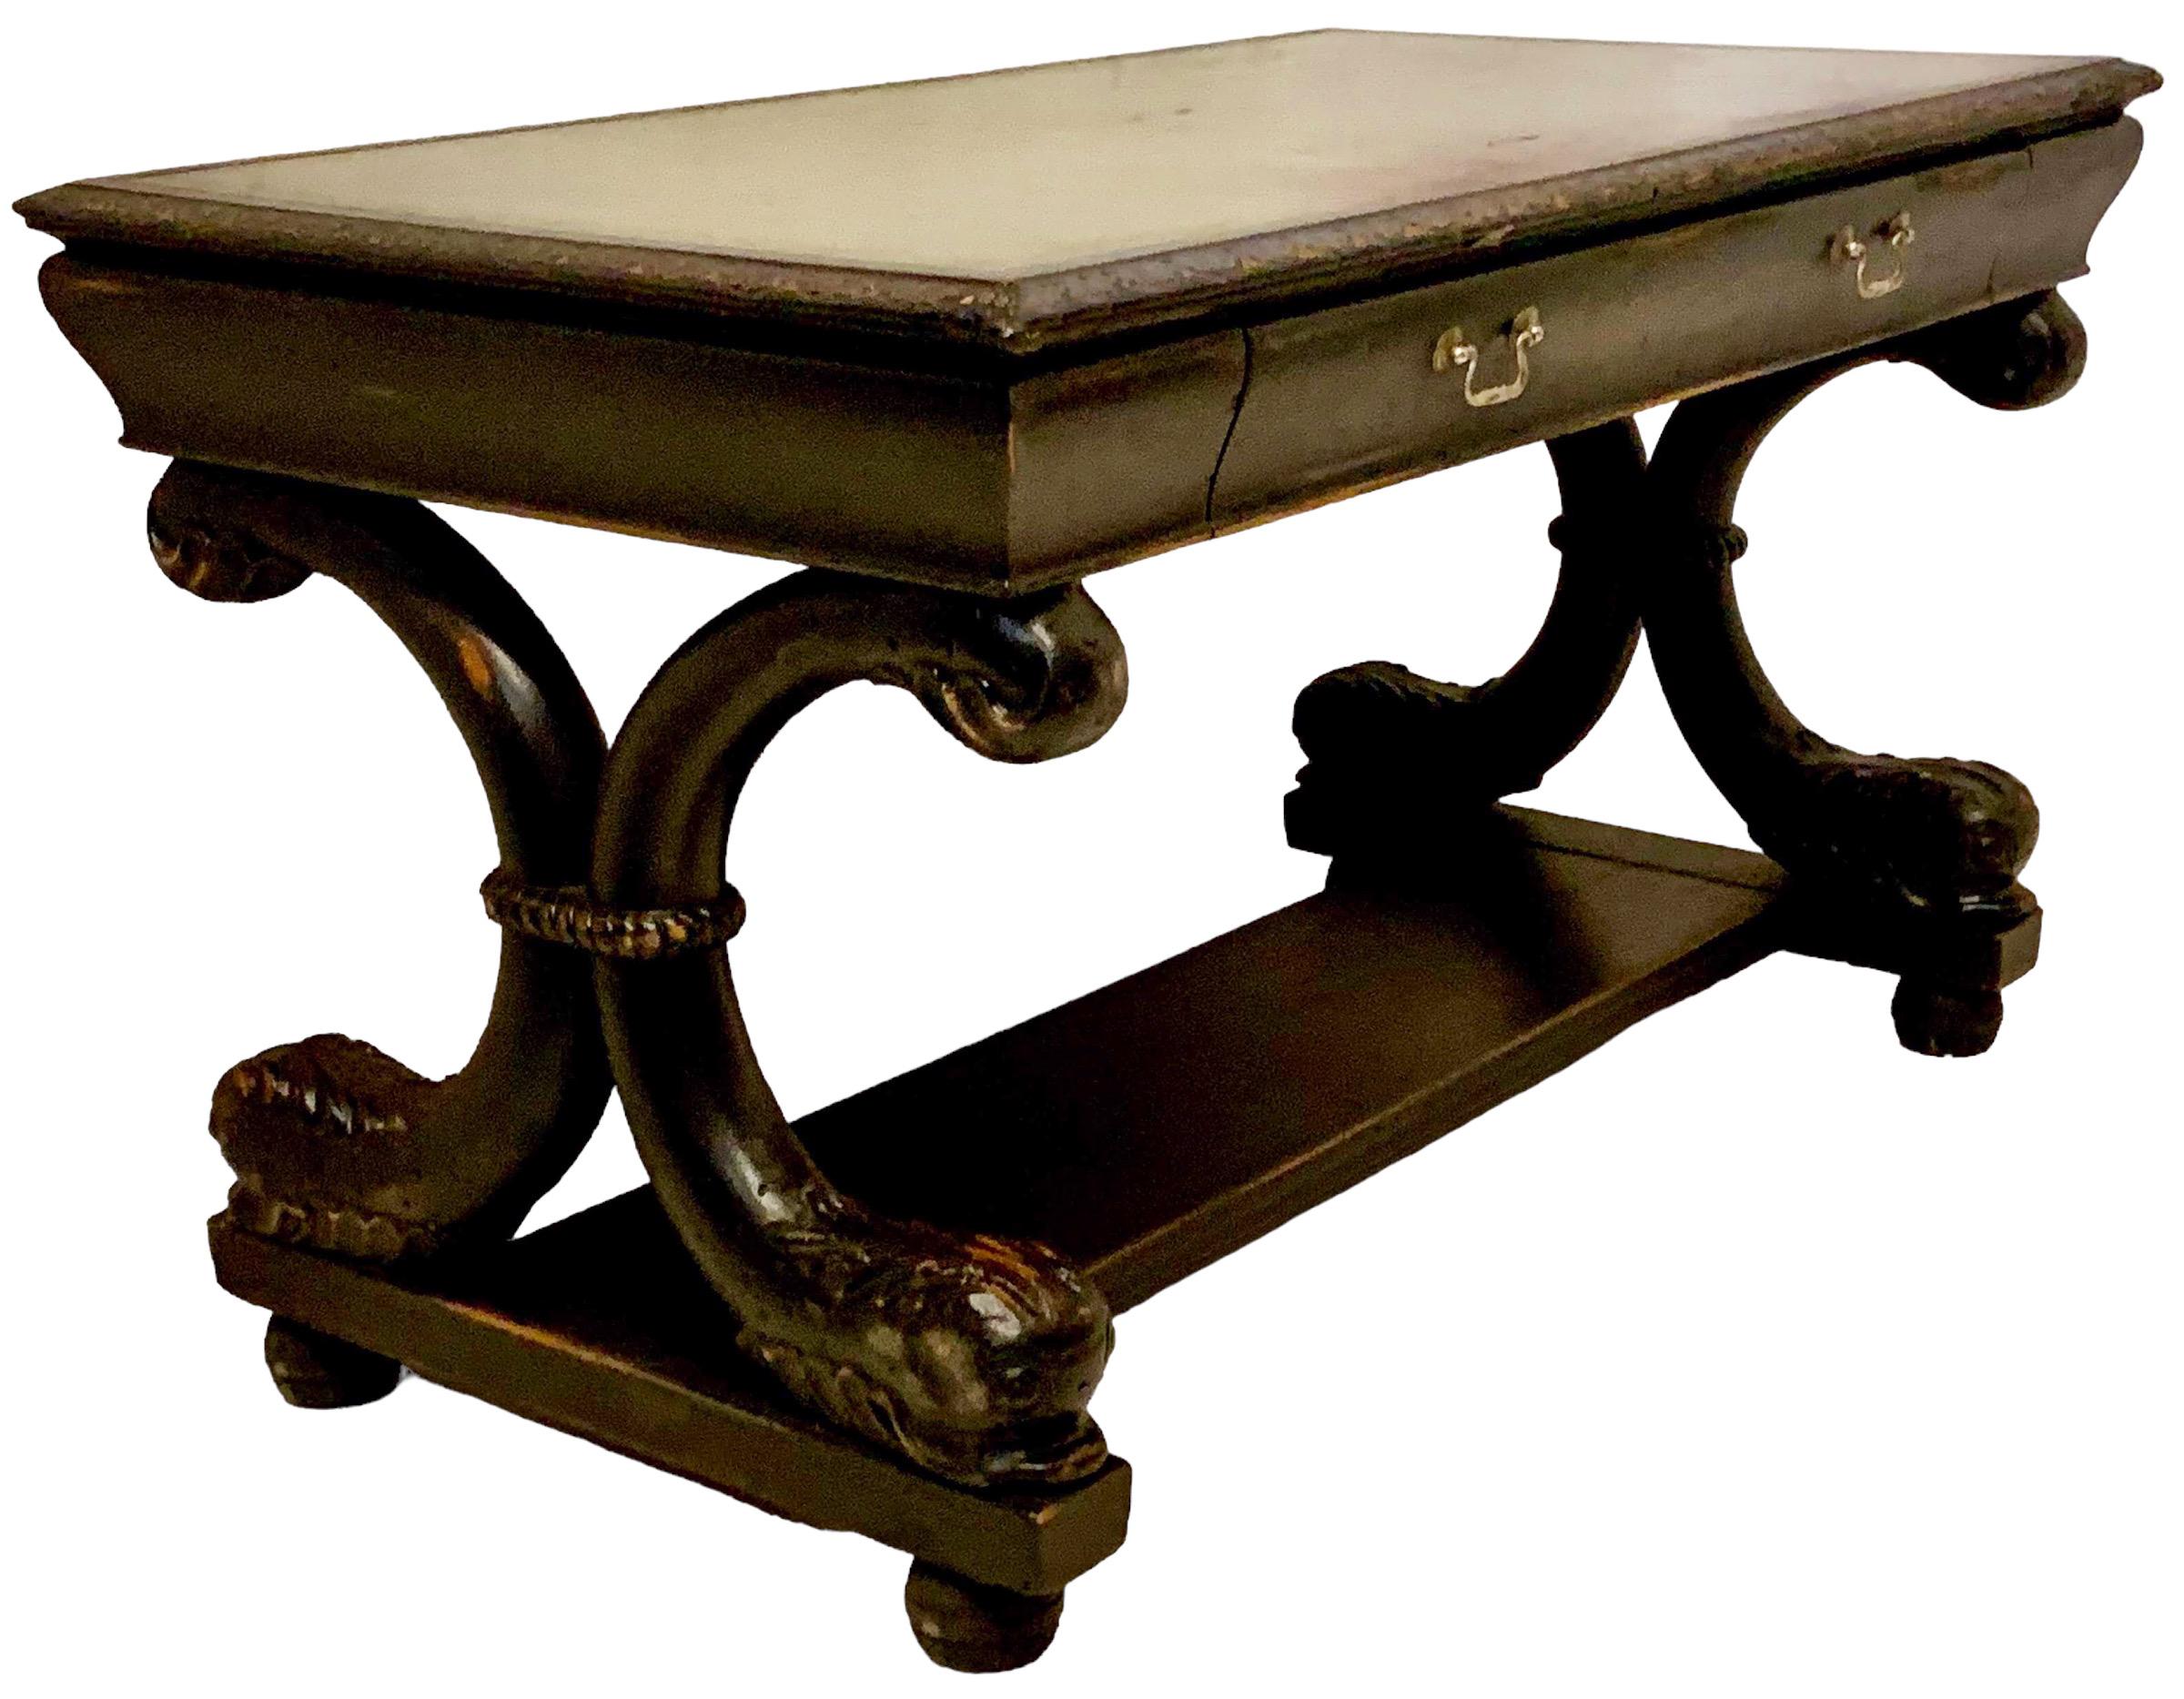 Neo-Classical R.J. Horner Style Desk / Table Green Leather Top & Dolphin Base In Good Condition For Sale In Kennesaw, GA